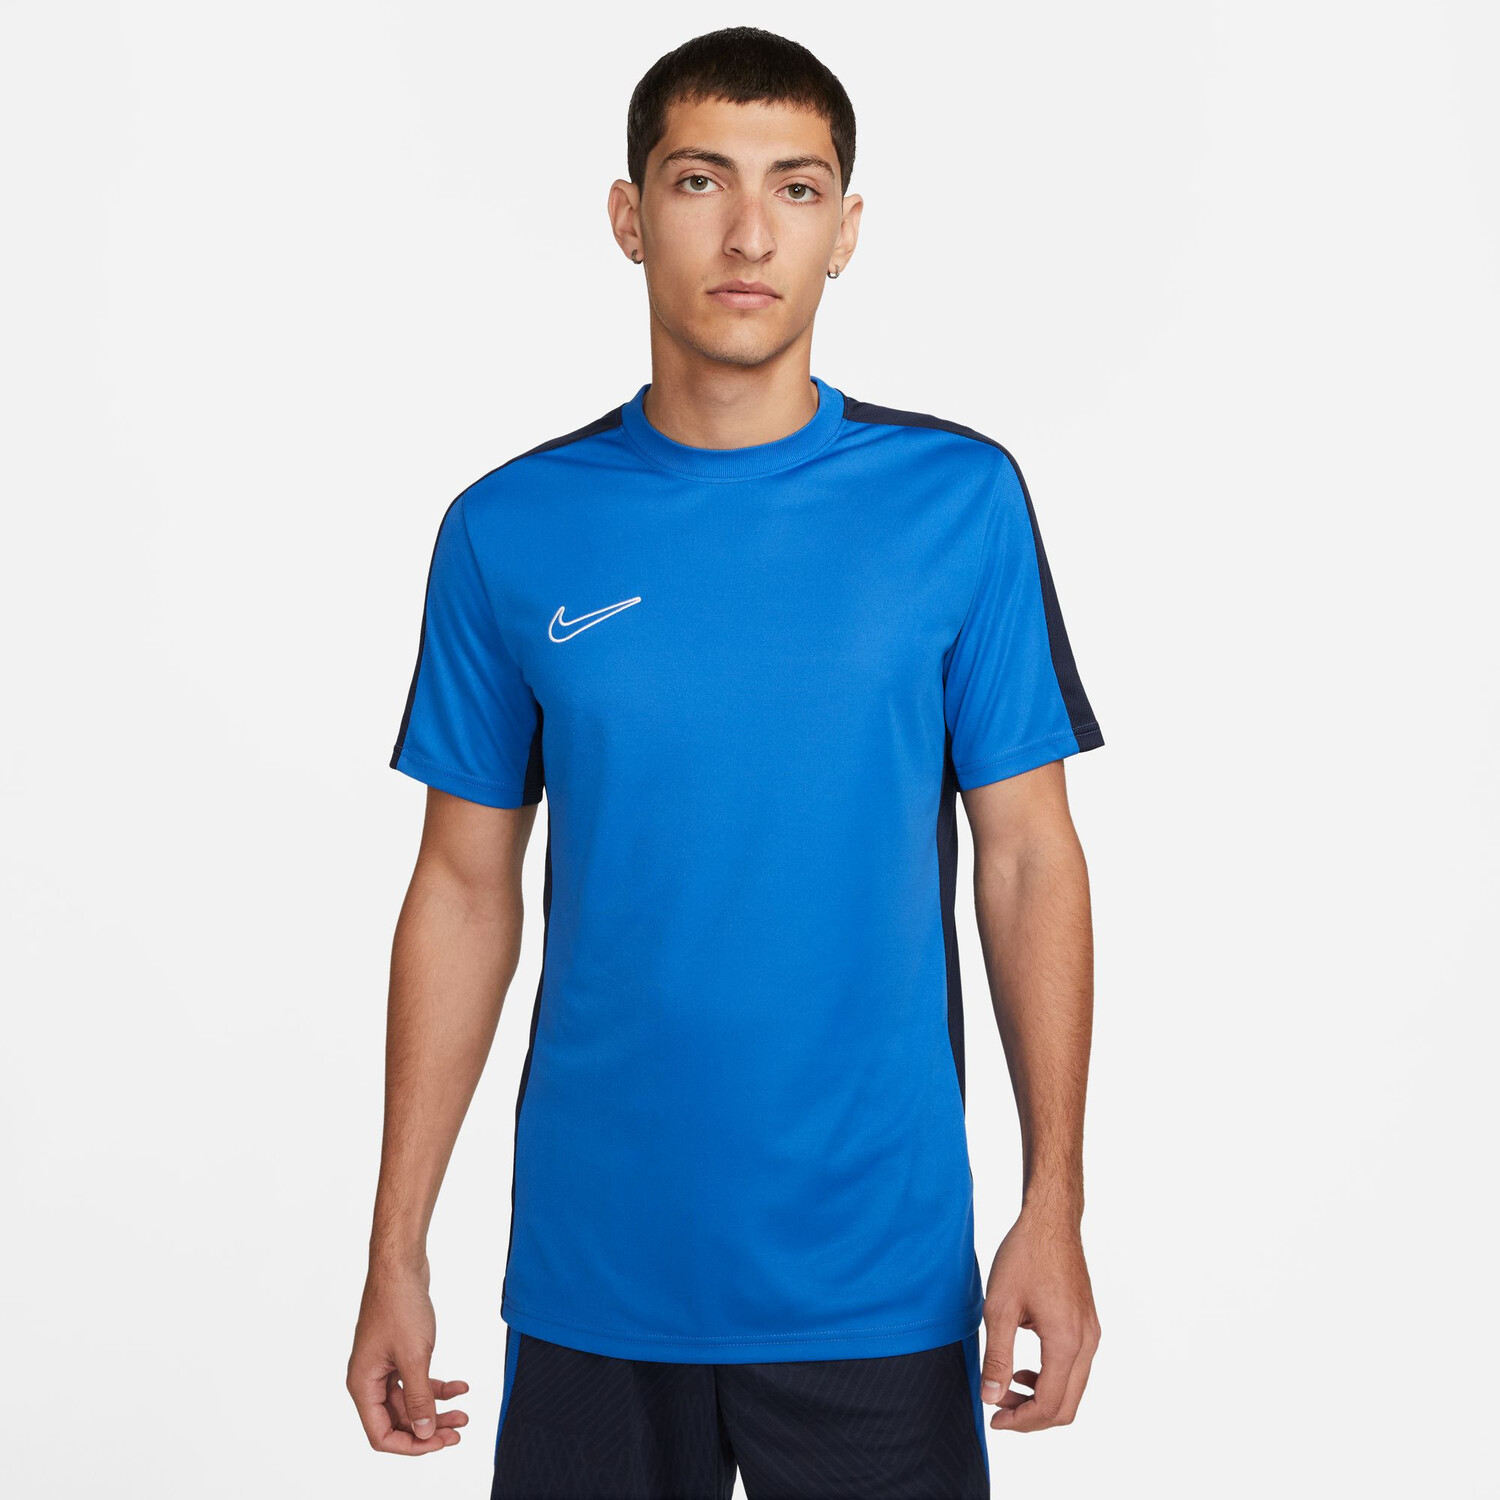 Maillot Nike Dri-FIT Academy - Nike - Maillots - Entraînement